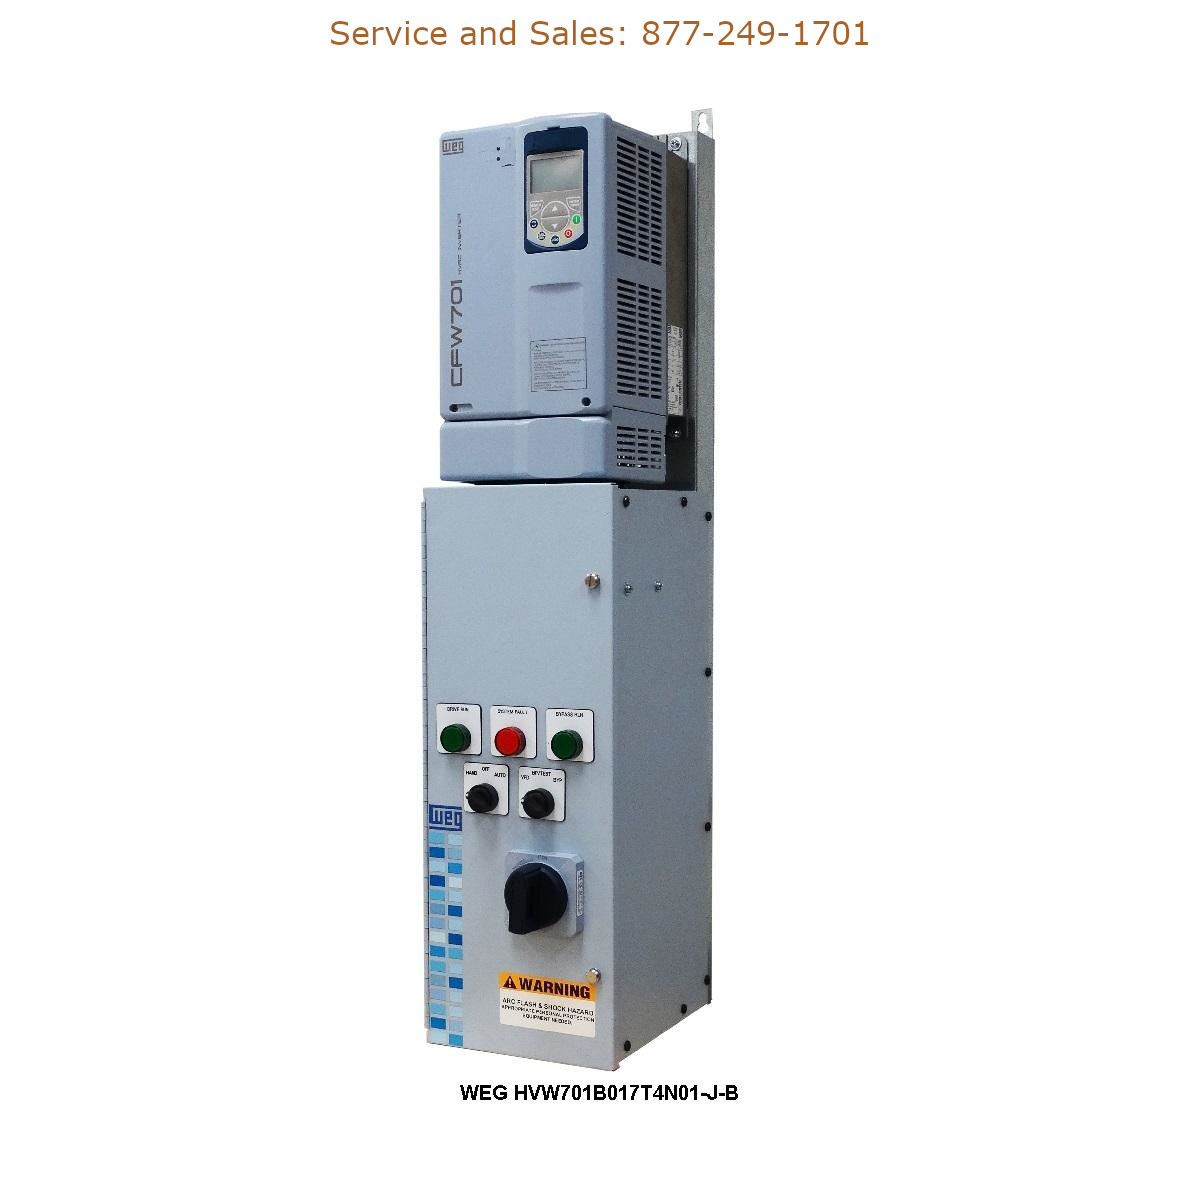 WEG HVW701B017T4N01-J-B WEG Model Number HVW701B017T4N01-J-B WEG Drives, Variable Speed Drives Repair Service, Troubleshooting, Replacement Parts https://gesrepair.com/wp-content/uploads/2022/WEG/WEG_HVW701B017T4N01-J-B_Drives_Variable_Speed_Drives.jpg